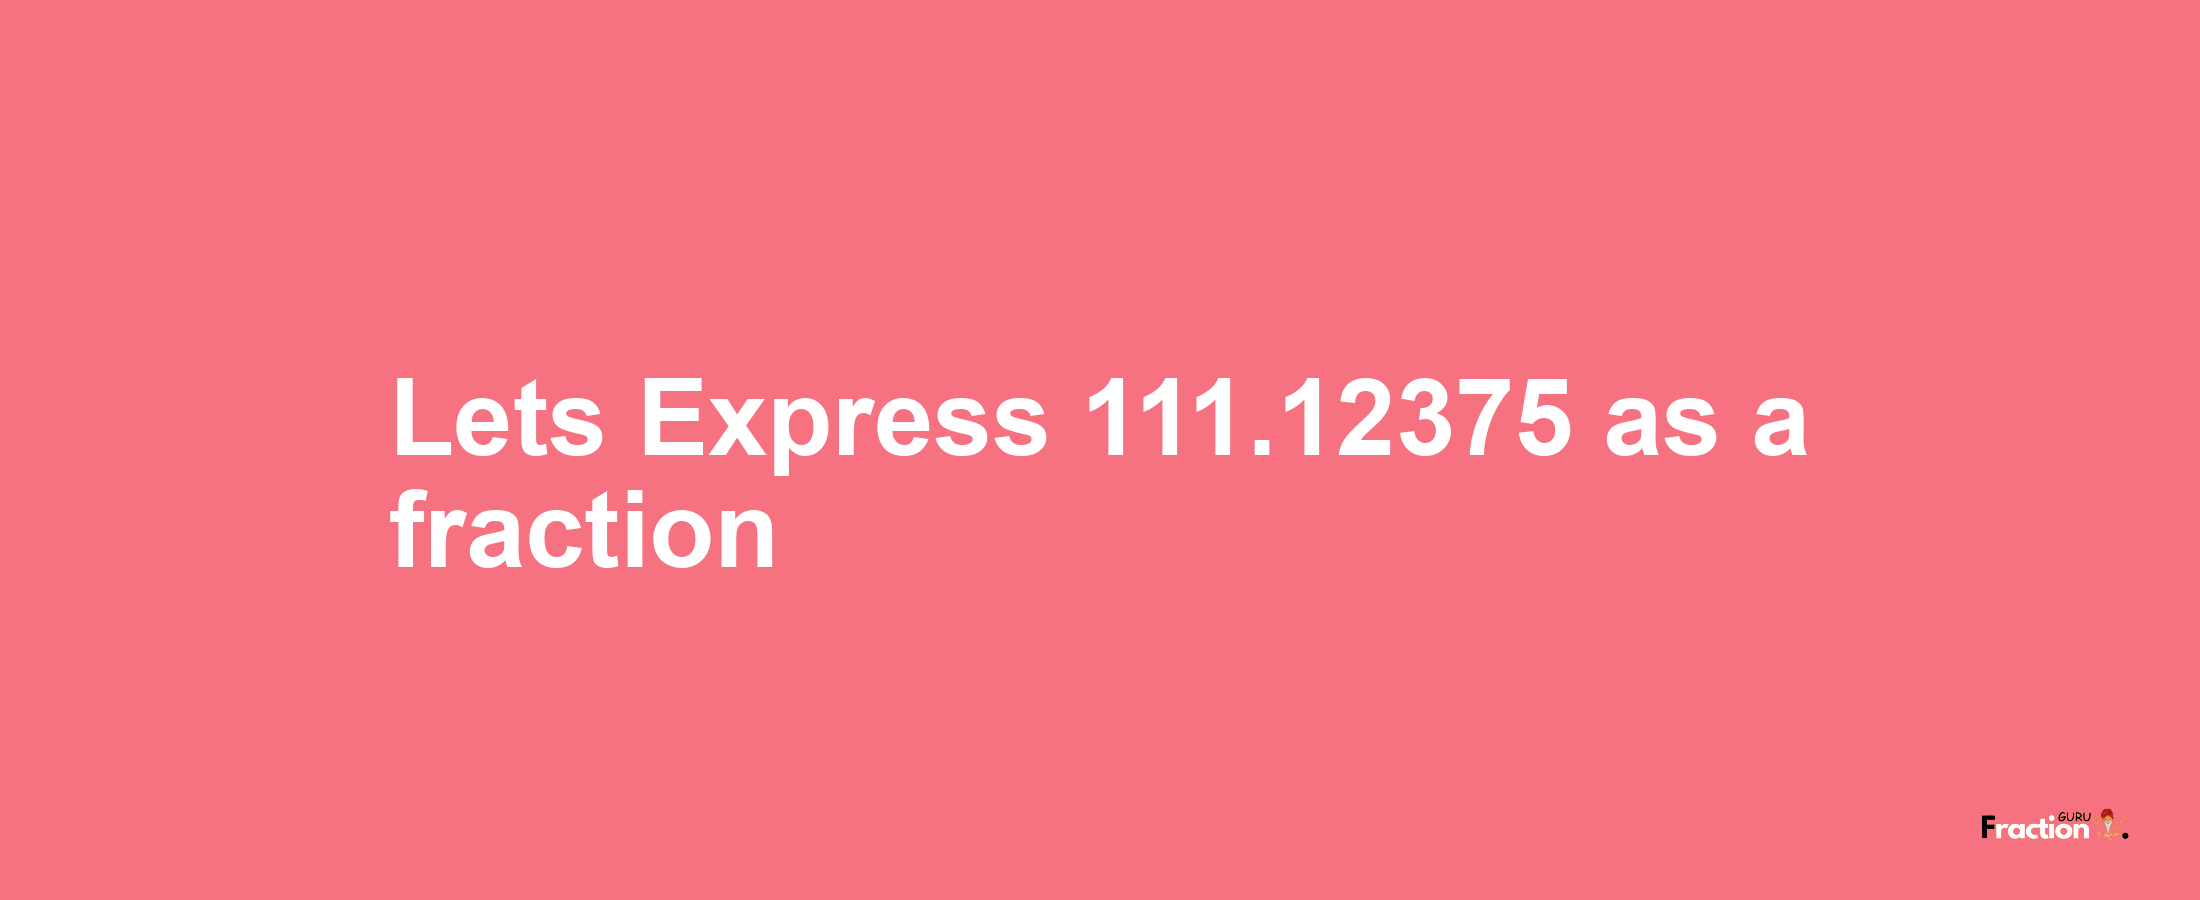 Lets Express 111.12375 as afraction